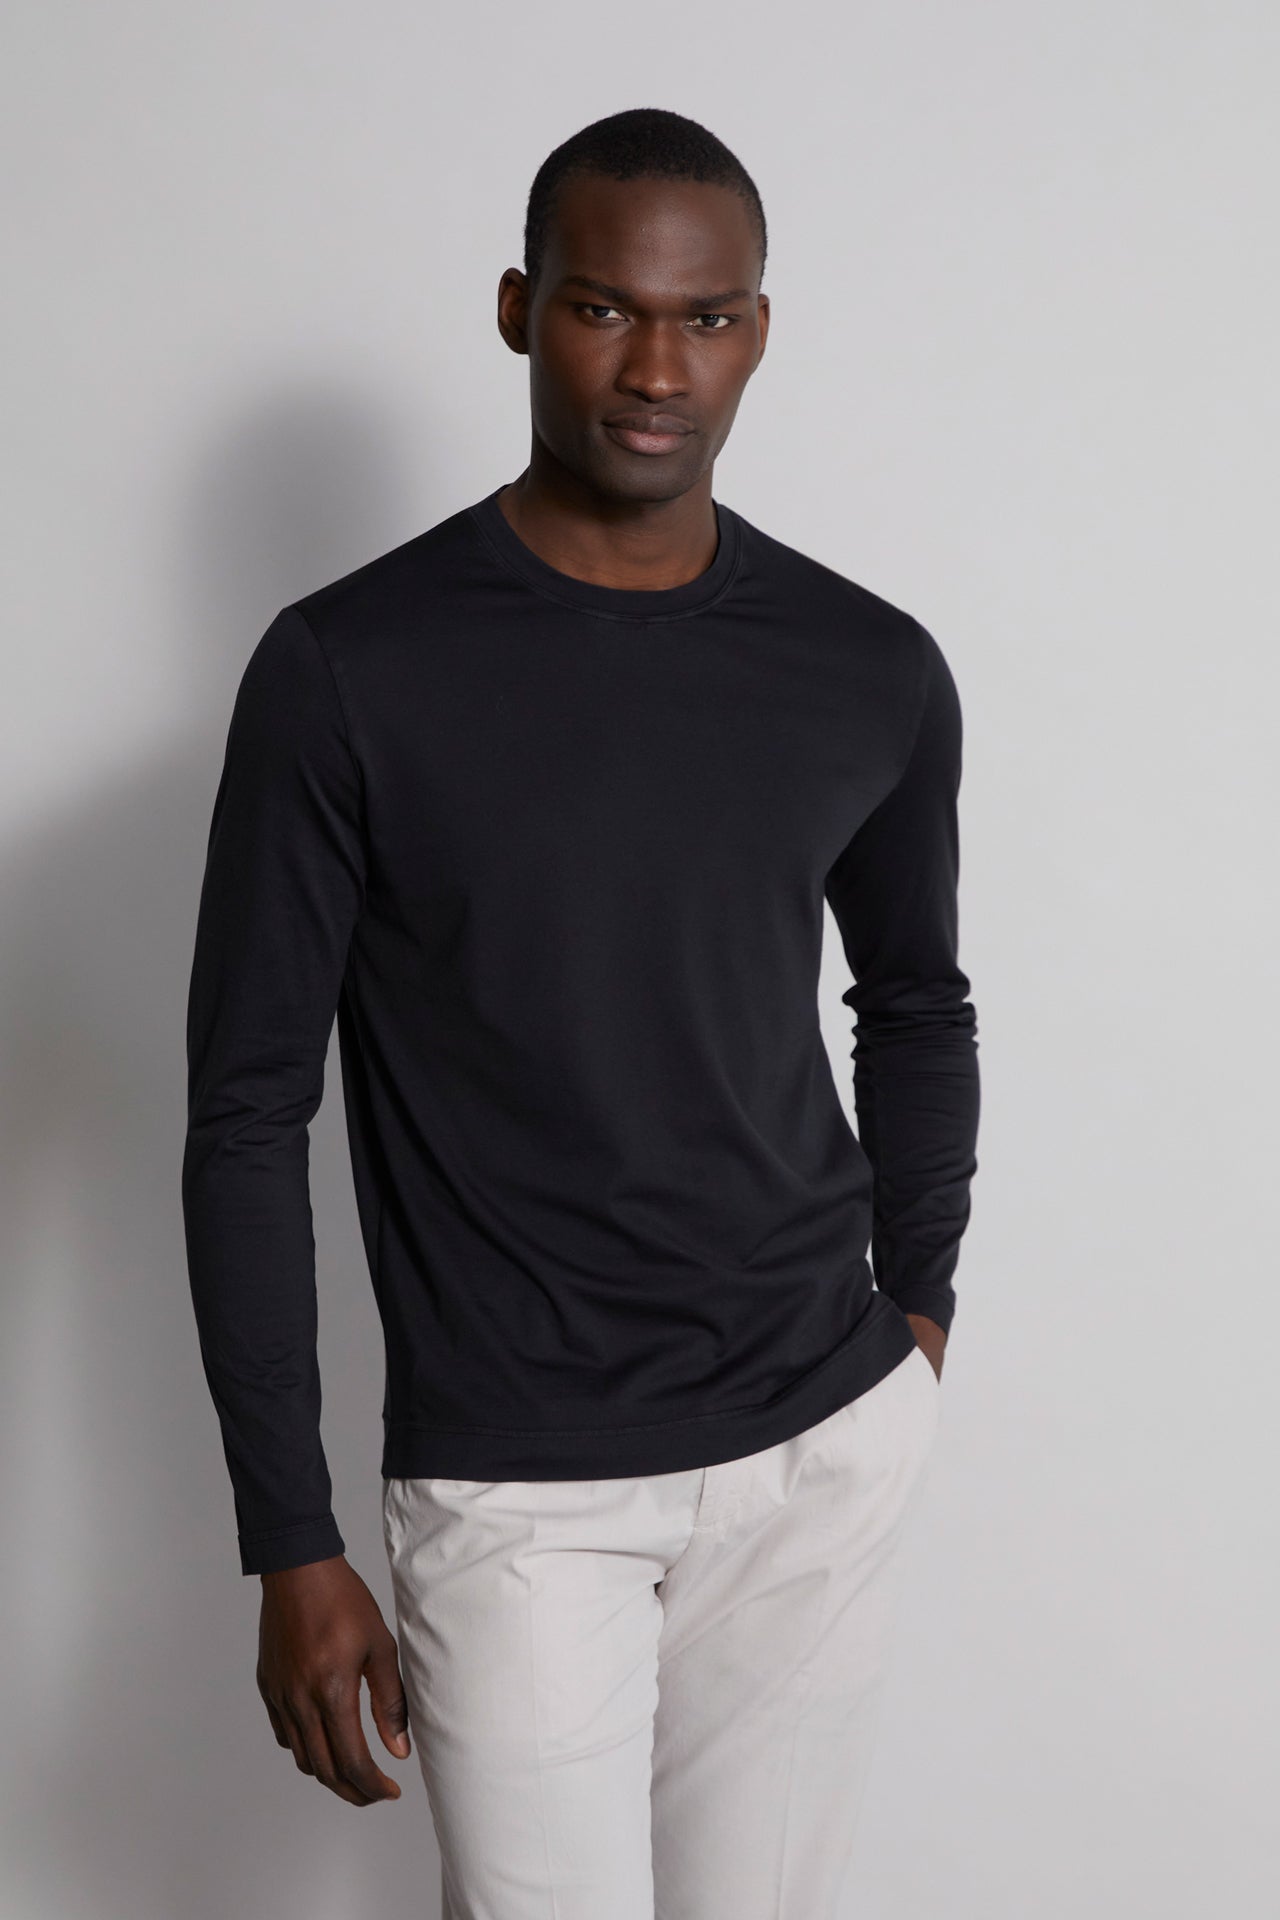 Jockey Extra-soft Acrylic Fiber Thermal Long Sleeve T-Shirt for Men - 2604  - The online shopping beauty store. Shop for makeup, skincare, haircare &  fragrances online at Chhotu Di Hatti.